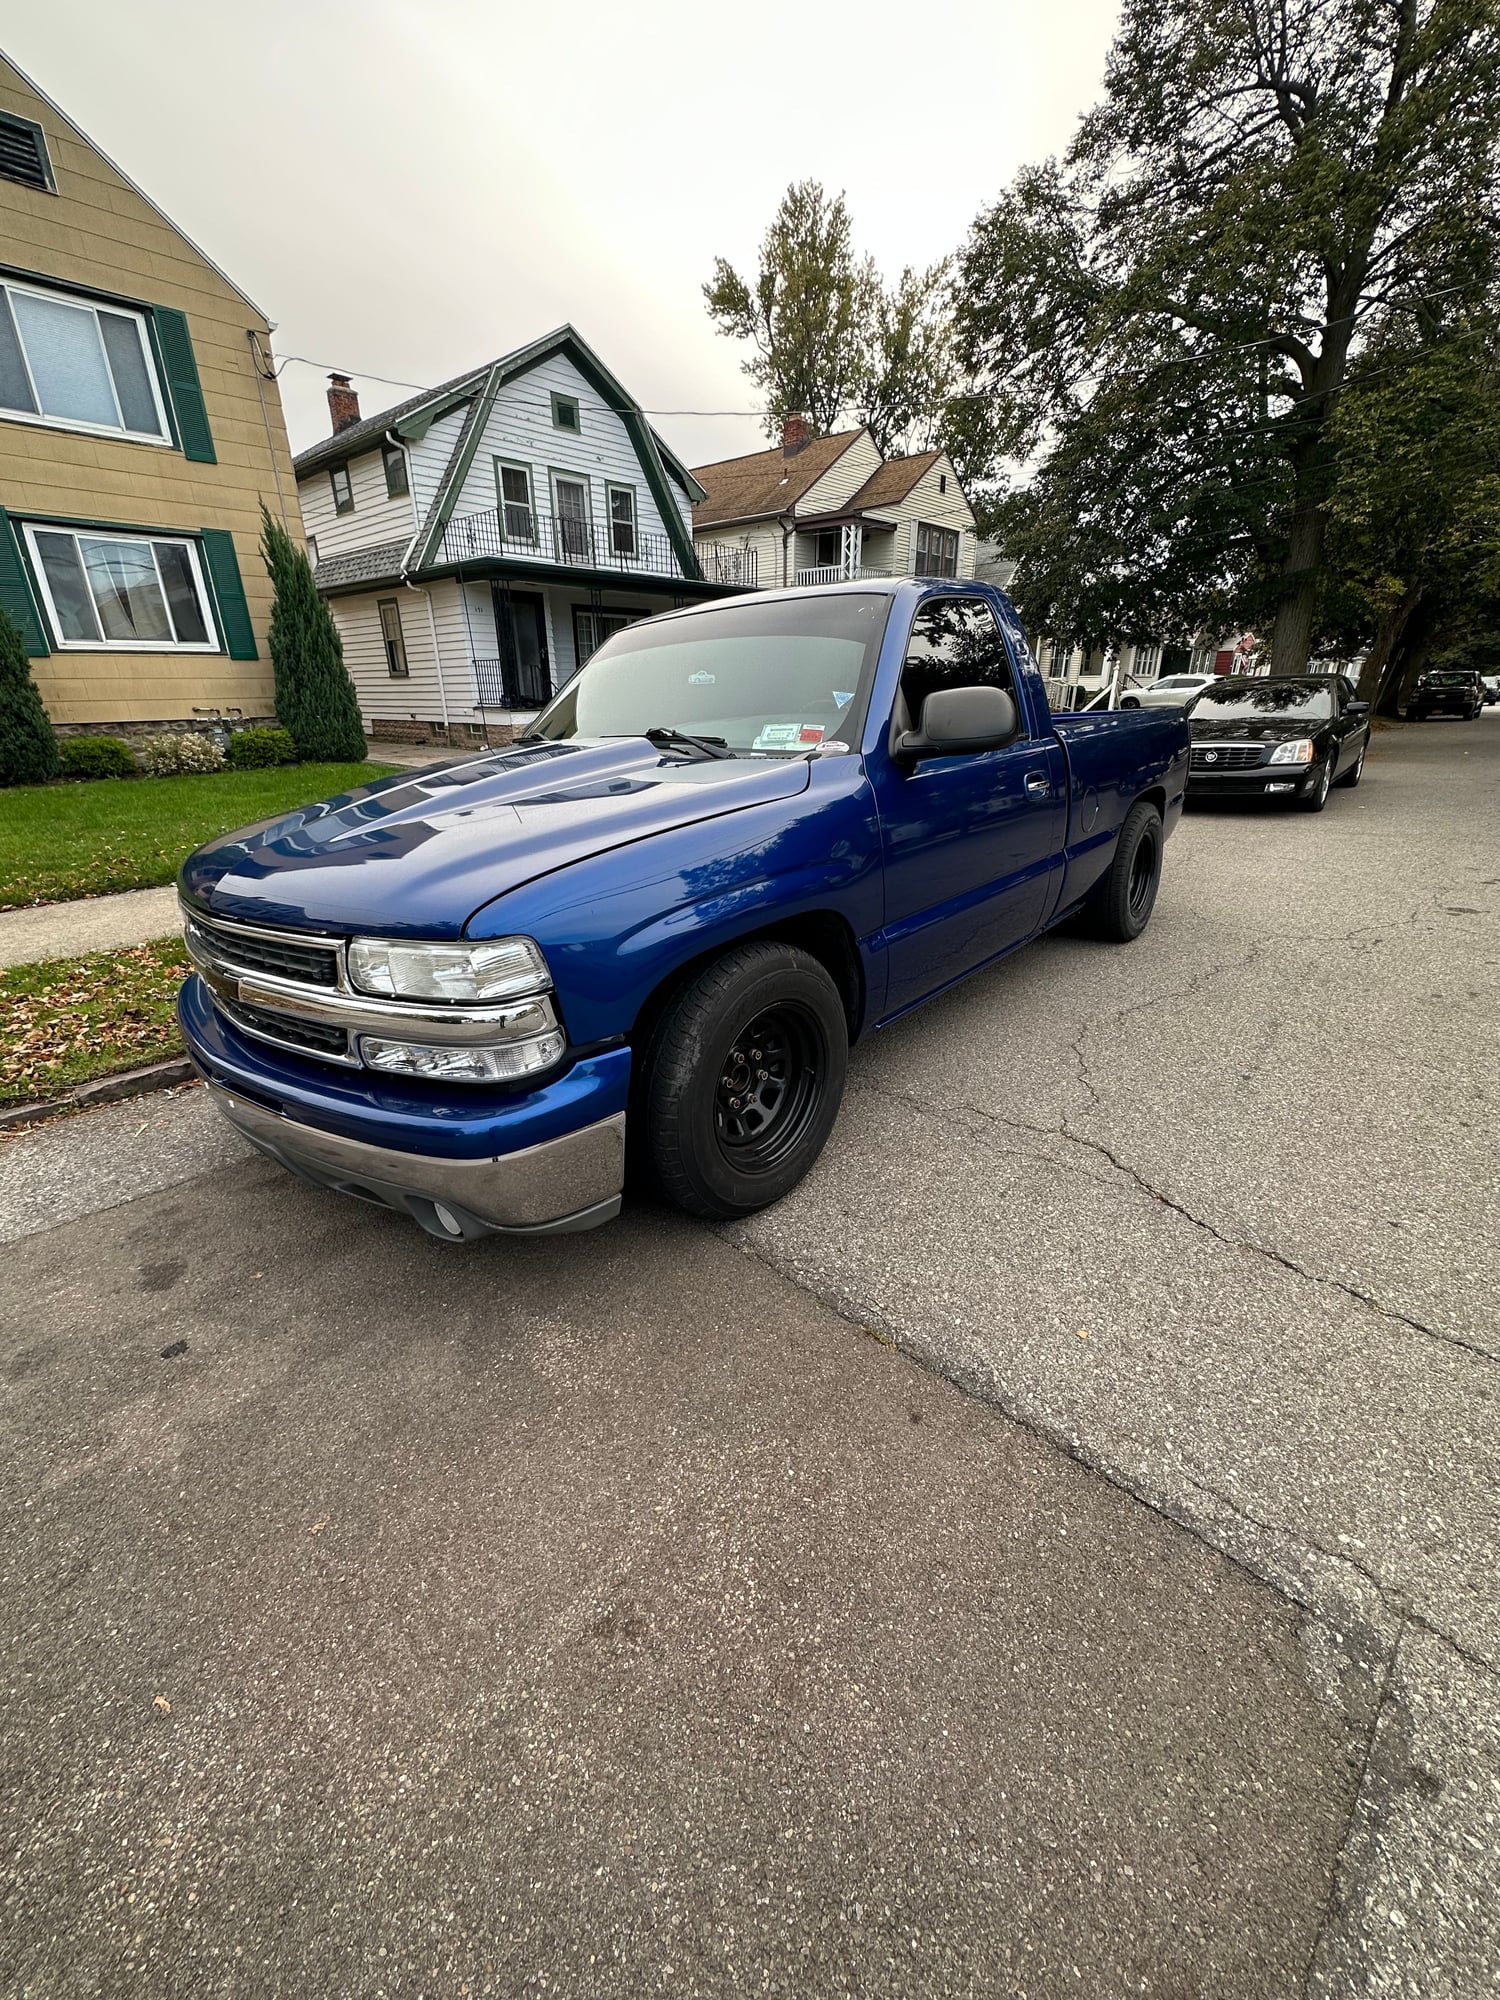 2000 Chevrolet Silverado 1500 - 2000 Chevy RCSB Roller - Used - VIN 1GCEC14V5YZ289652 - 109,000 Miles - 8 cyl - 2WD - Automatic - Truck - Blue - Orchard Park, NY 14224, United States